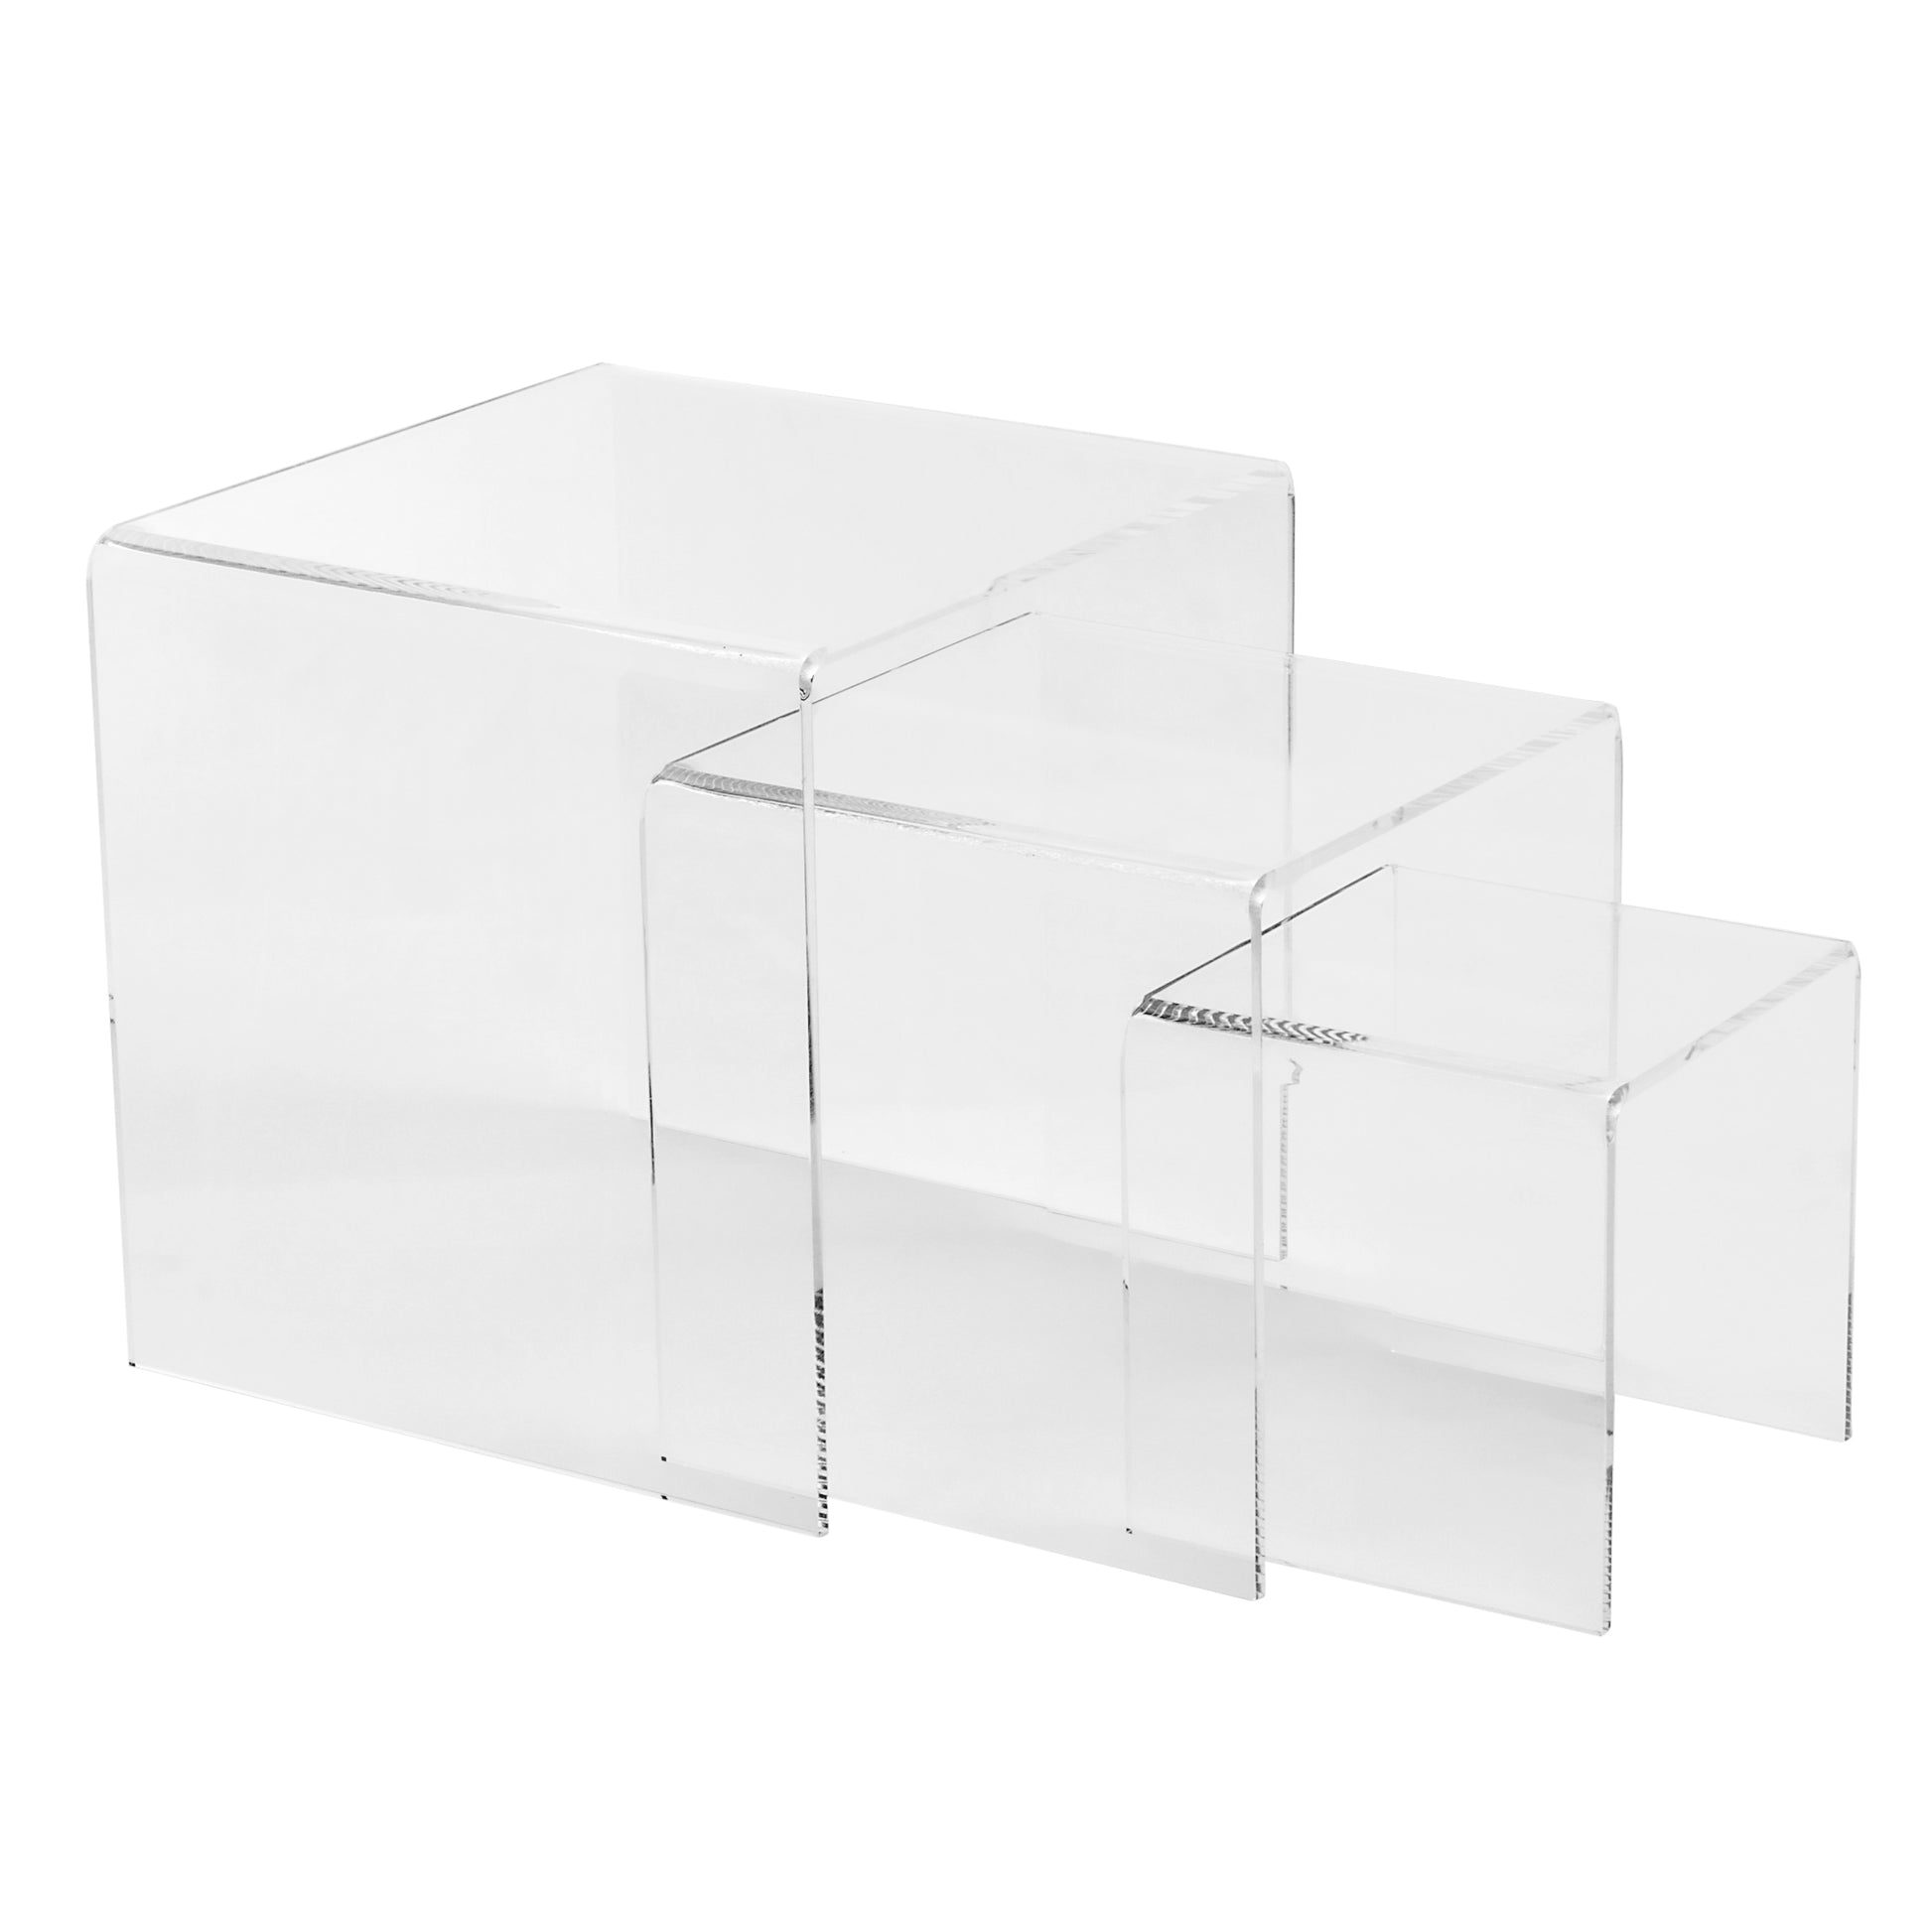 Acrylic Riser Display Stands - Clear